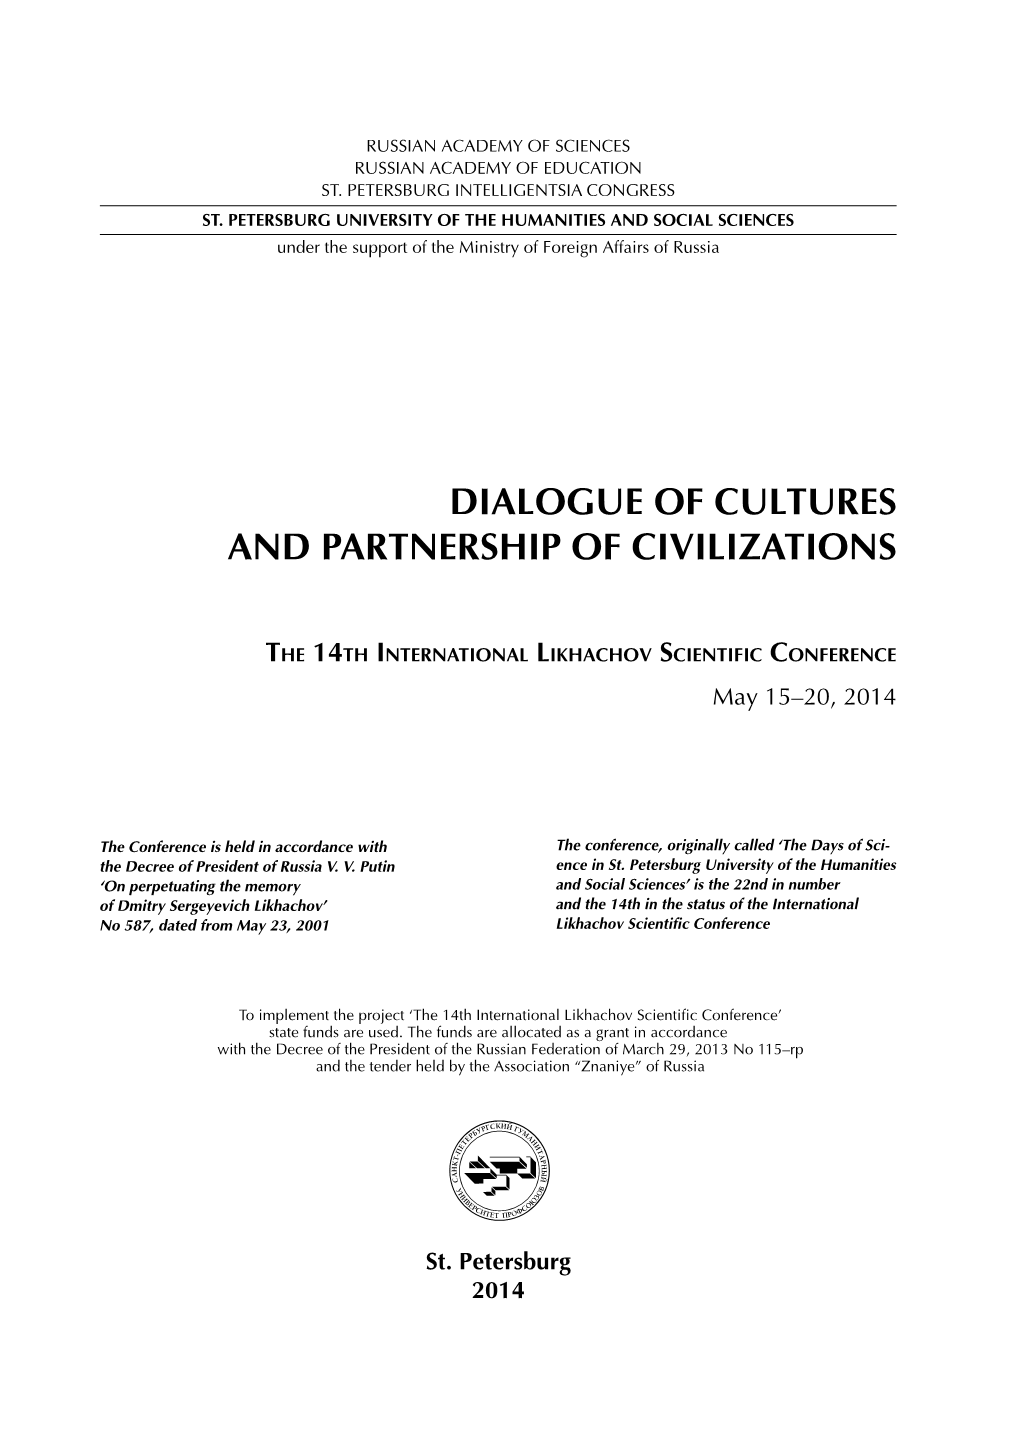 Dialogue of Cultures and Partnership of Civilizations